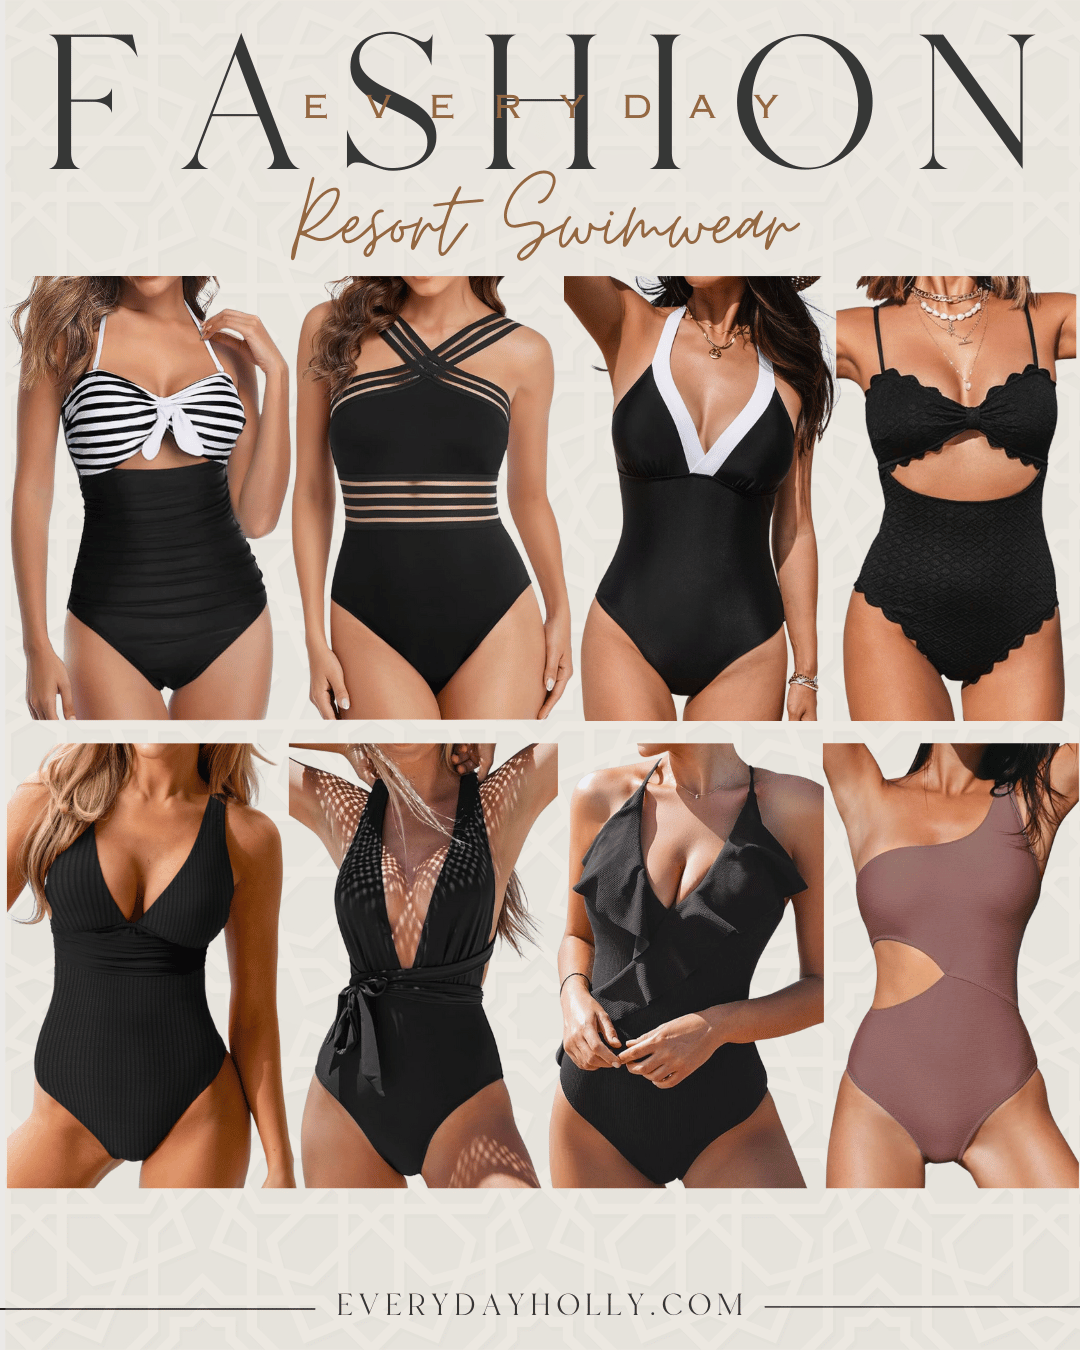 the ultimate guide to resort style swimwear, dresses, accessories, and more | guide, resort, resort style, vacation, spring break, beach, resort swimwear, swim, swimsuit, one piece, black, cut out swim suit